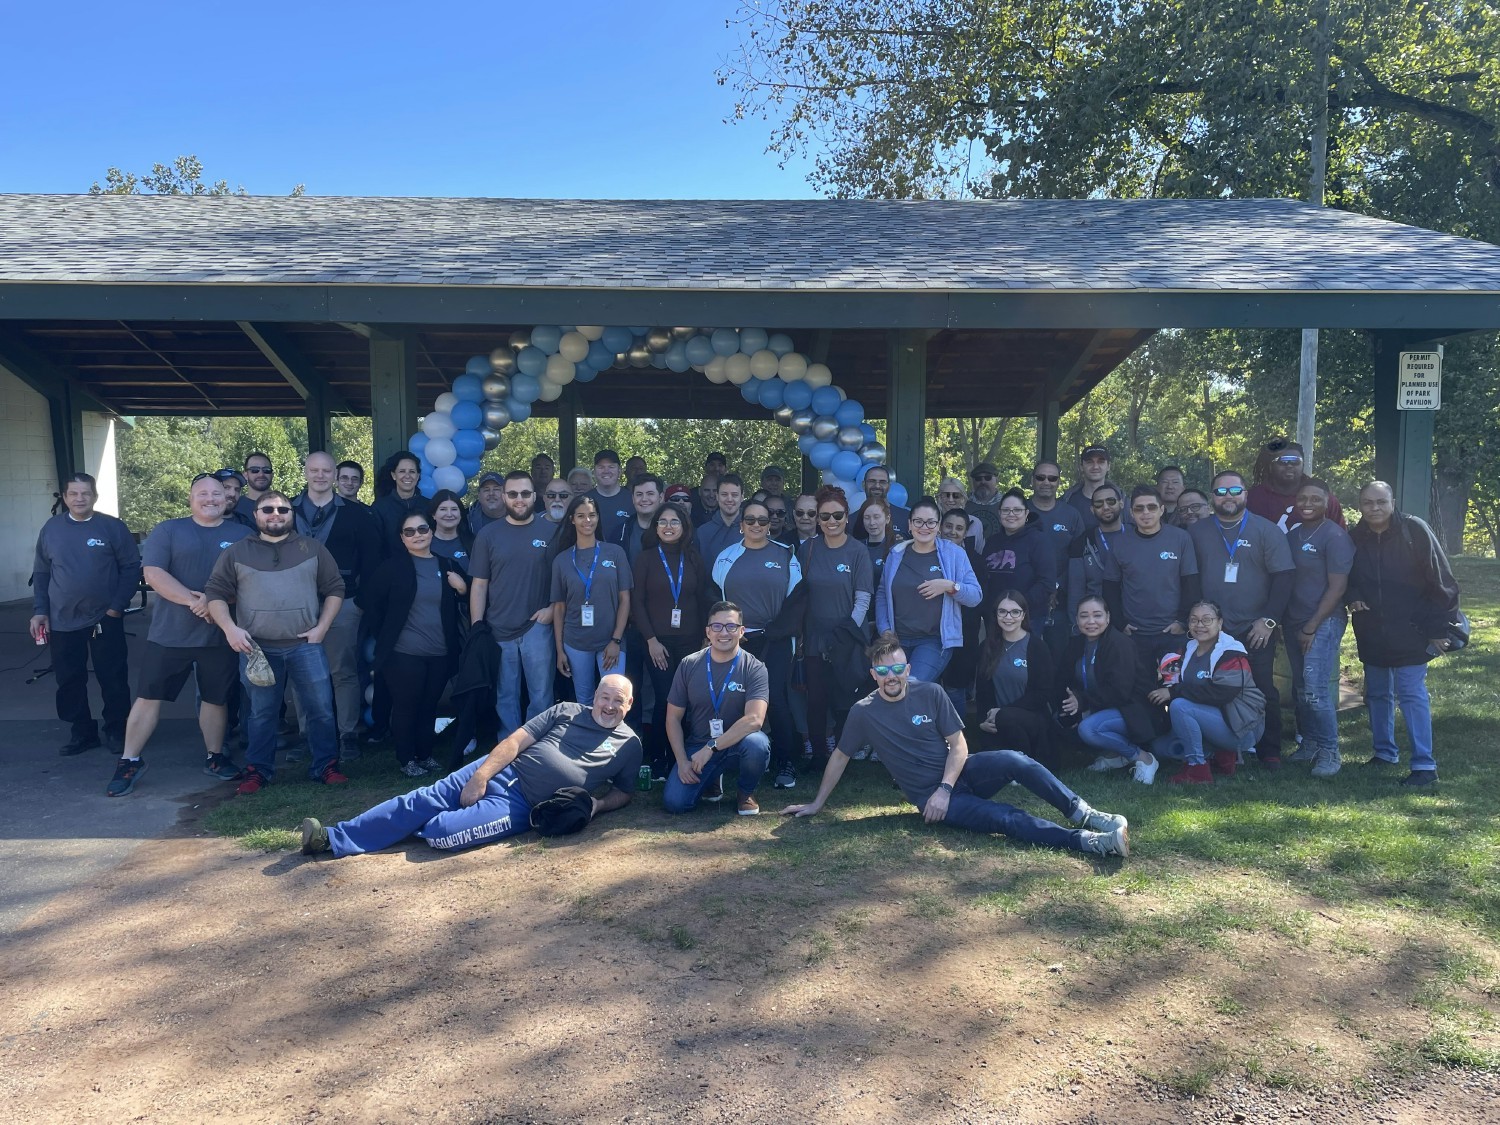 To celebrate a successful year and all of our team’s accomplishments, our Connecticut site has an annual picnic.